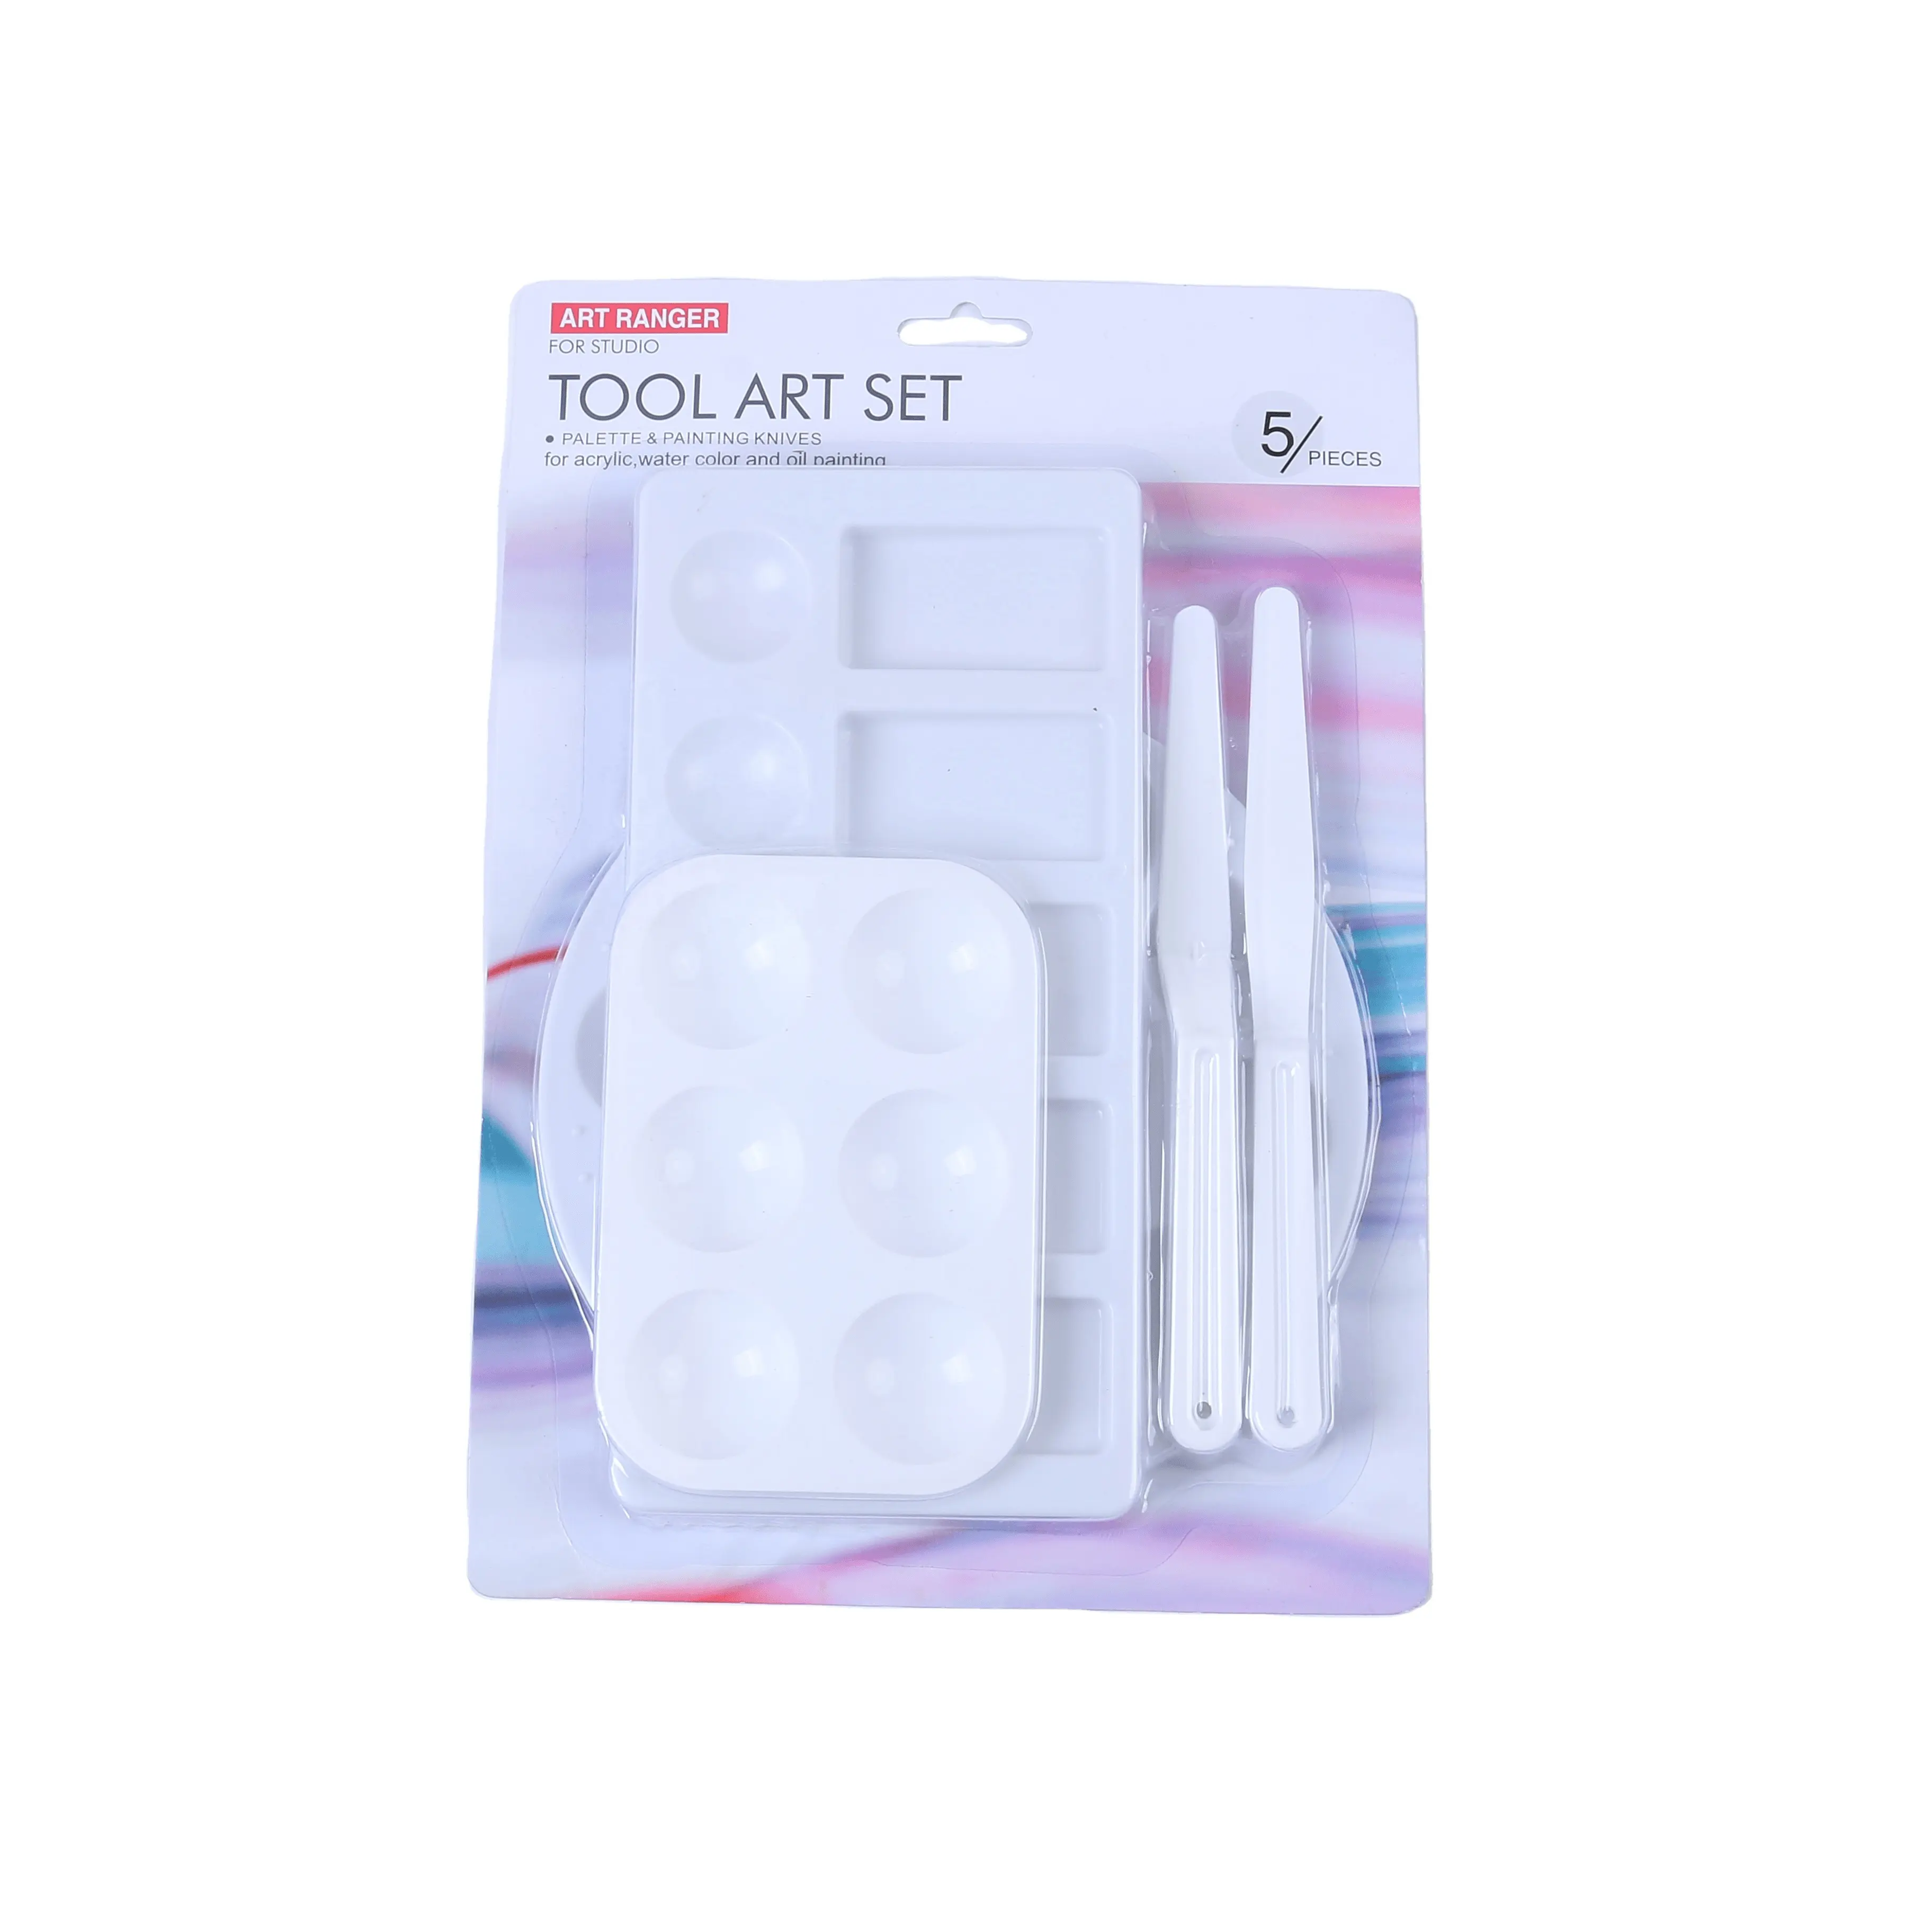 Tool art set palette and painting knives